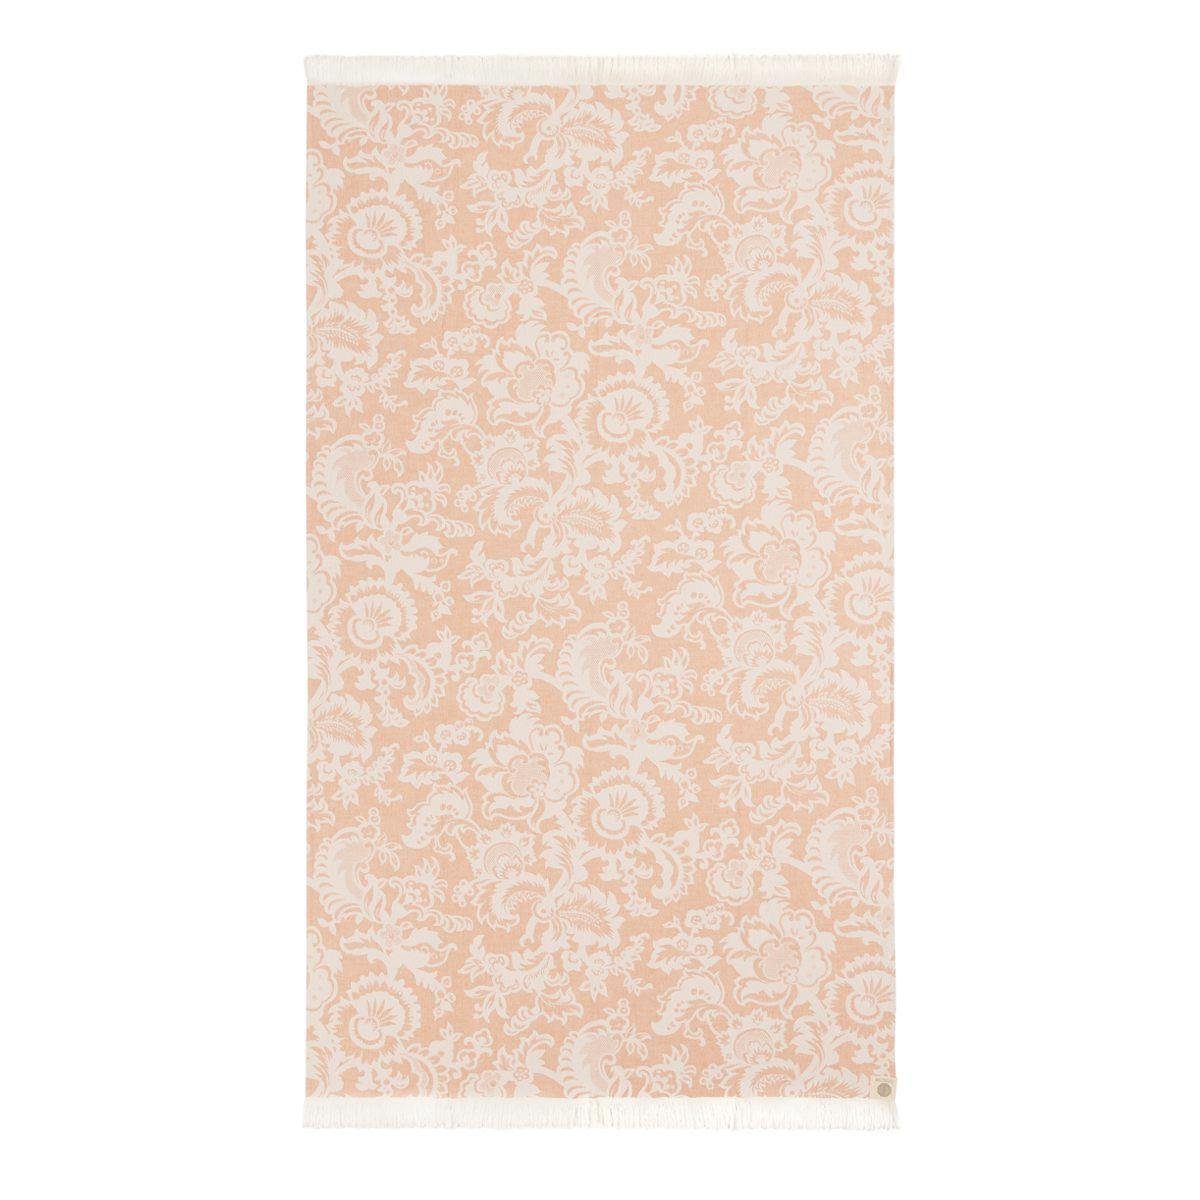 440s Badetuch 440s Pareo Strand-Tuch Baumwolle (1-St) Abstrakter Barock Apricot